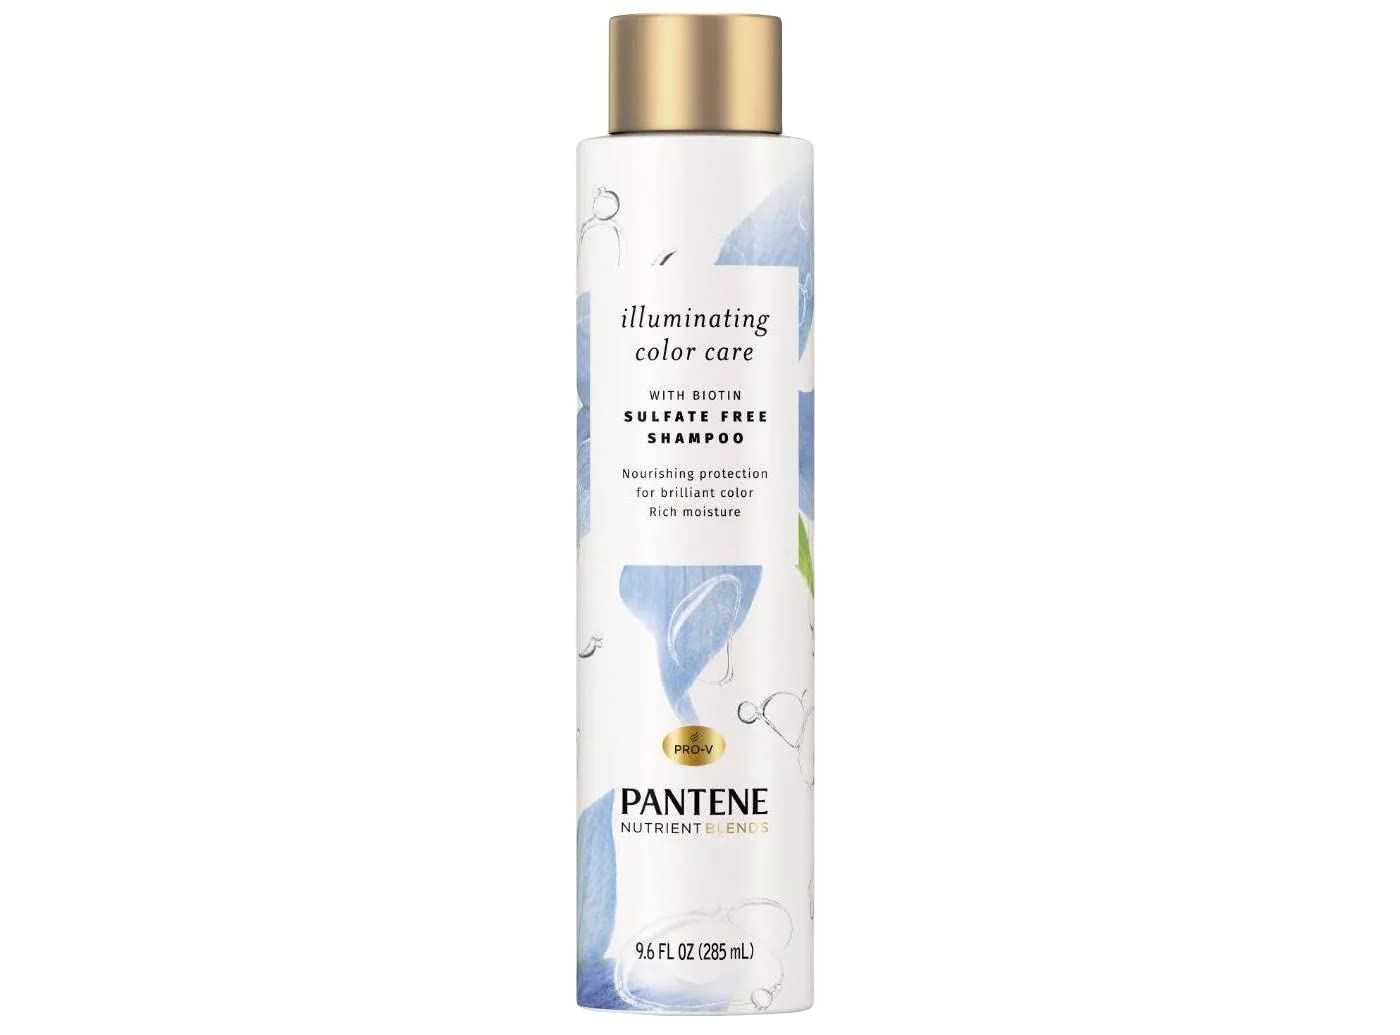 Pantene Shampoo and Conditioner for Illuminating Color Care